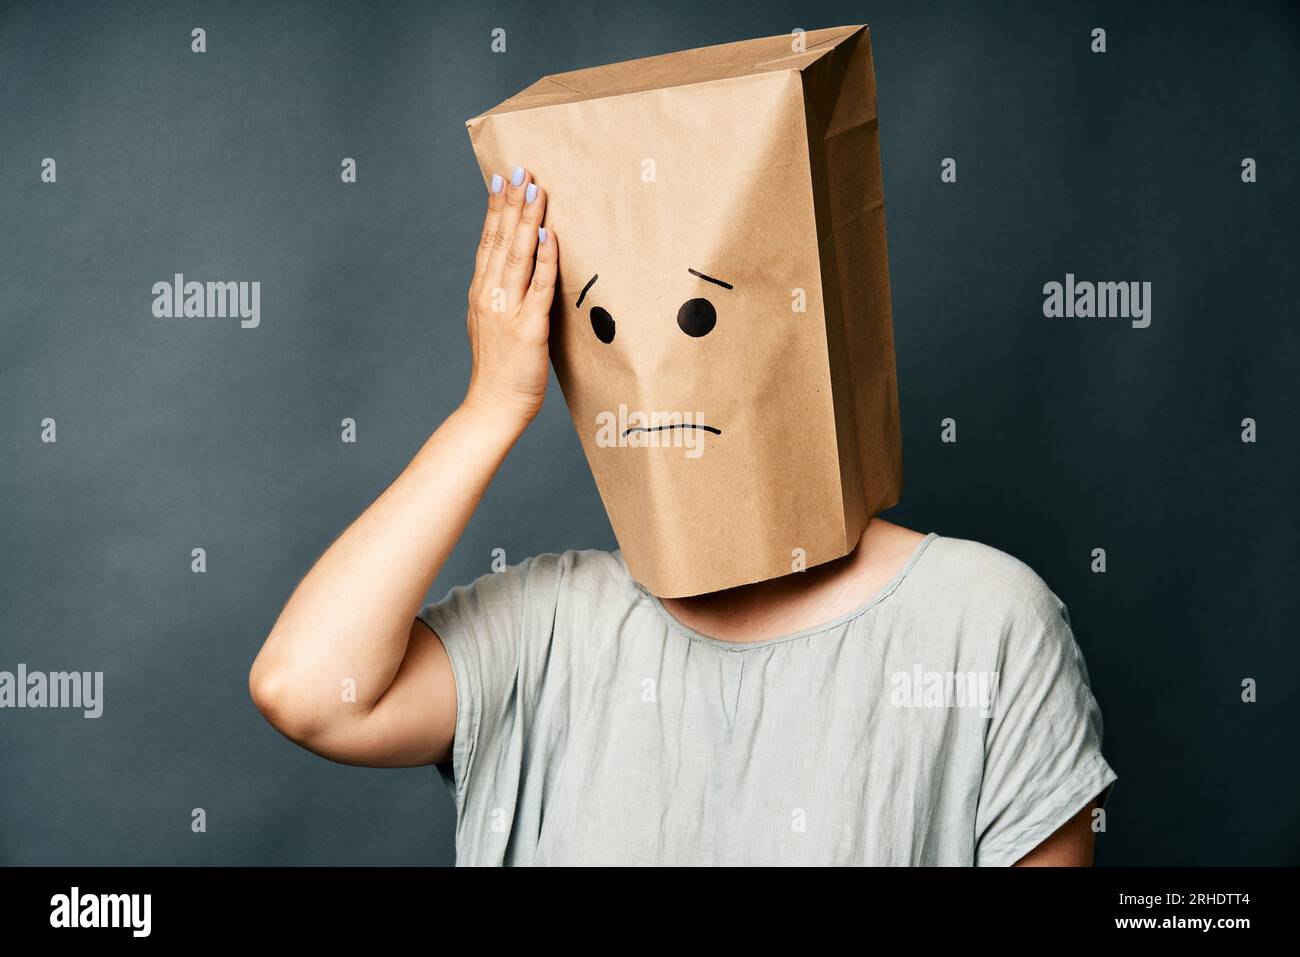 807 Brown Paper Bag On Head Images, Stock Photos, 3D objects, & Vectors